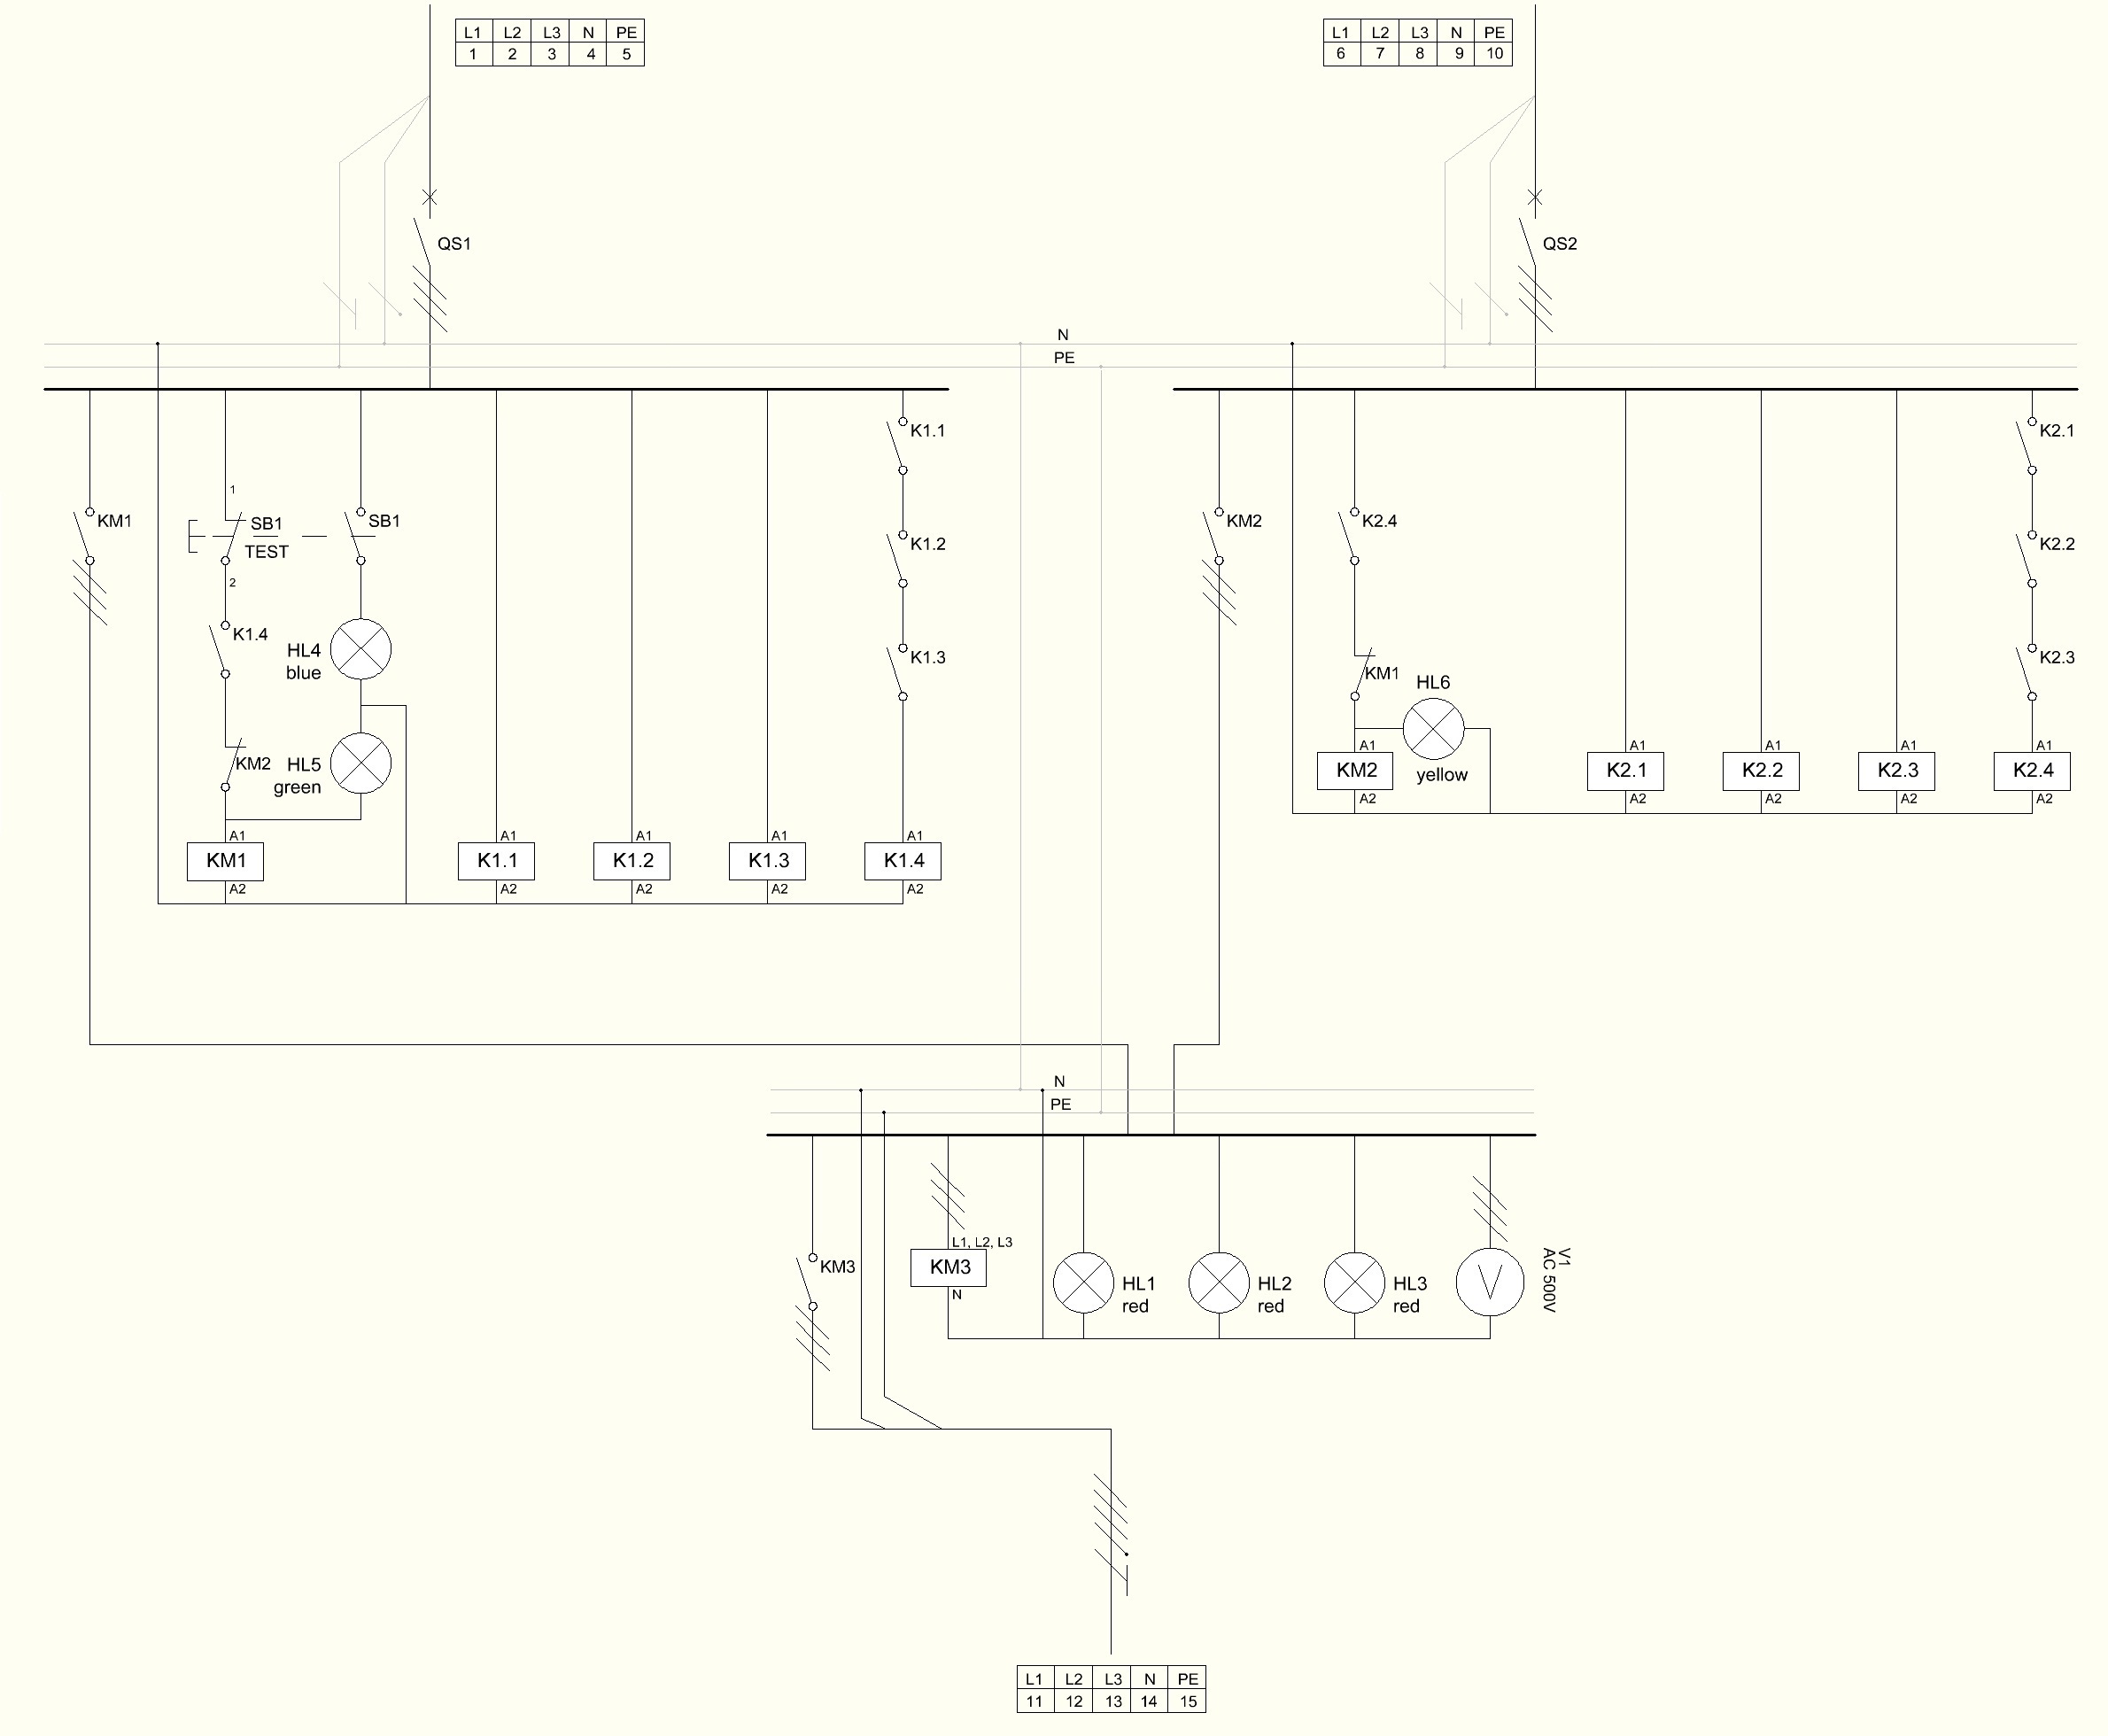 Wiring Diagram For Manual Transfer Switch Into 400a Service